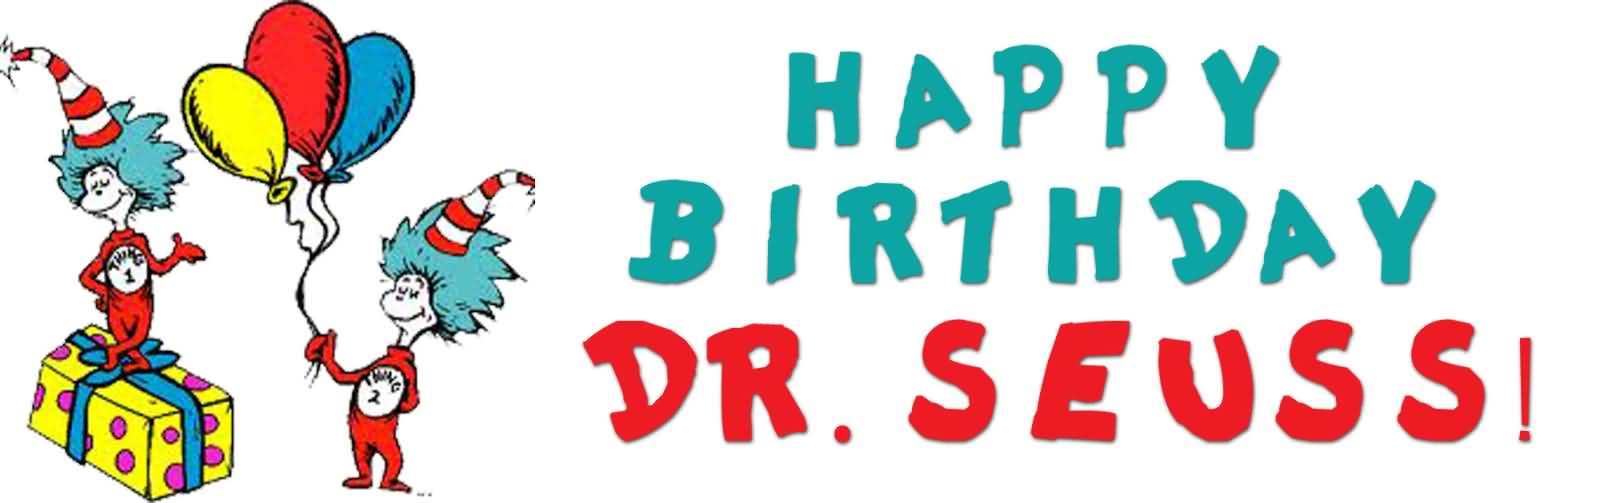 Happy Birthday Dr. Seuss Facebook Cover Picture